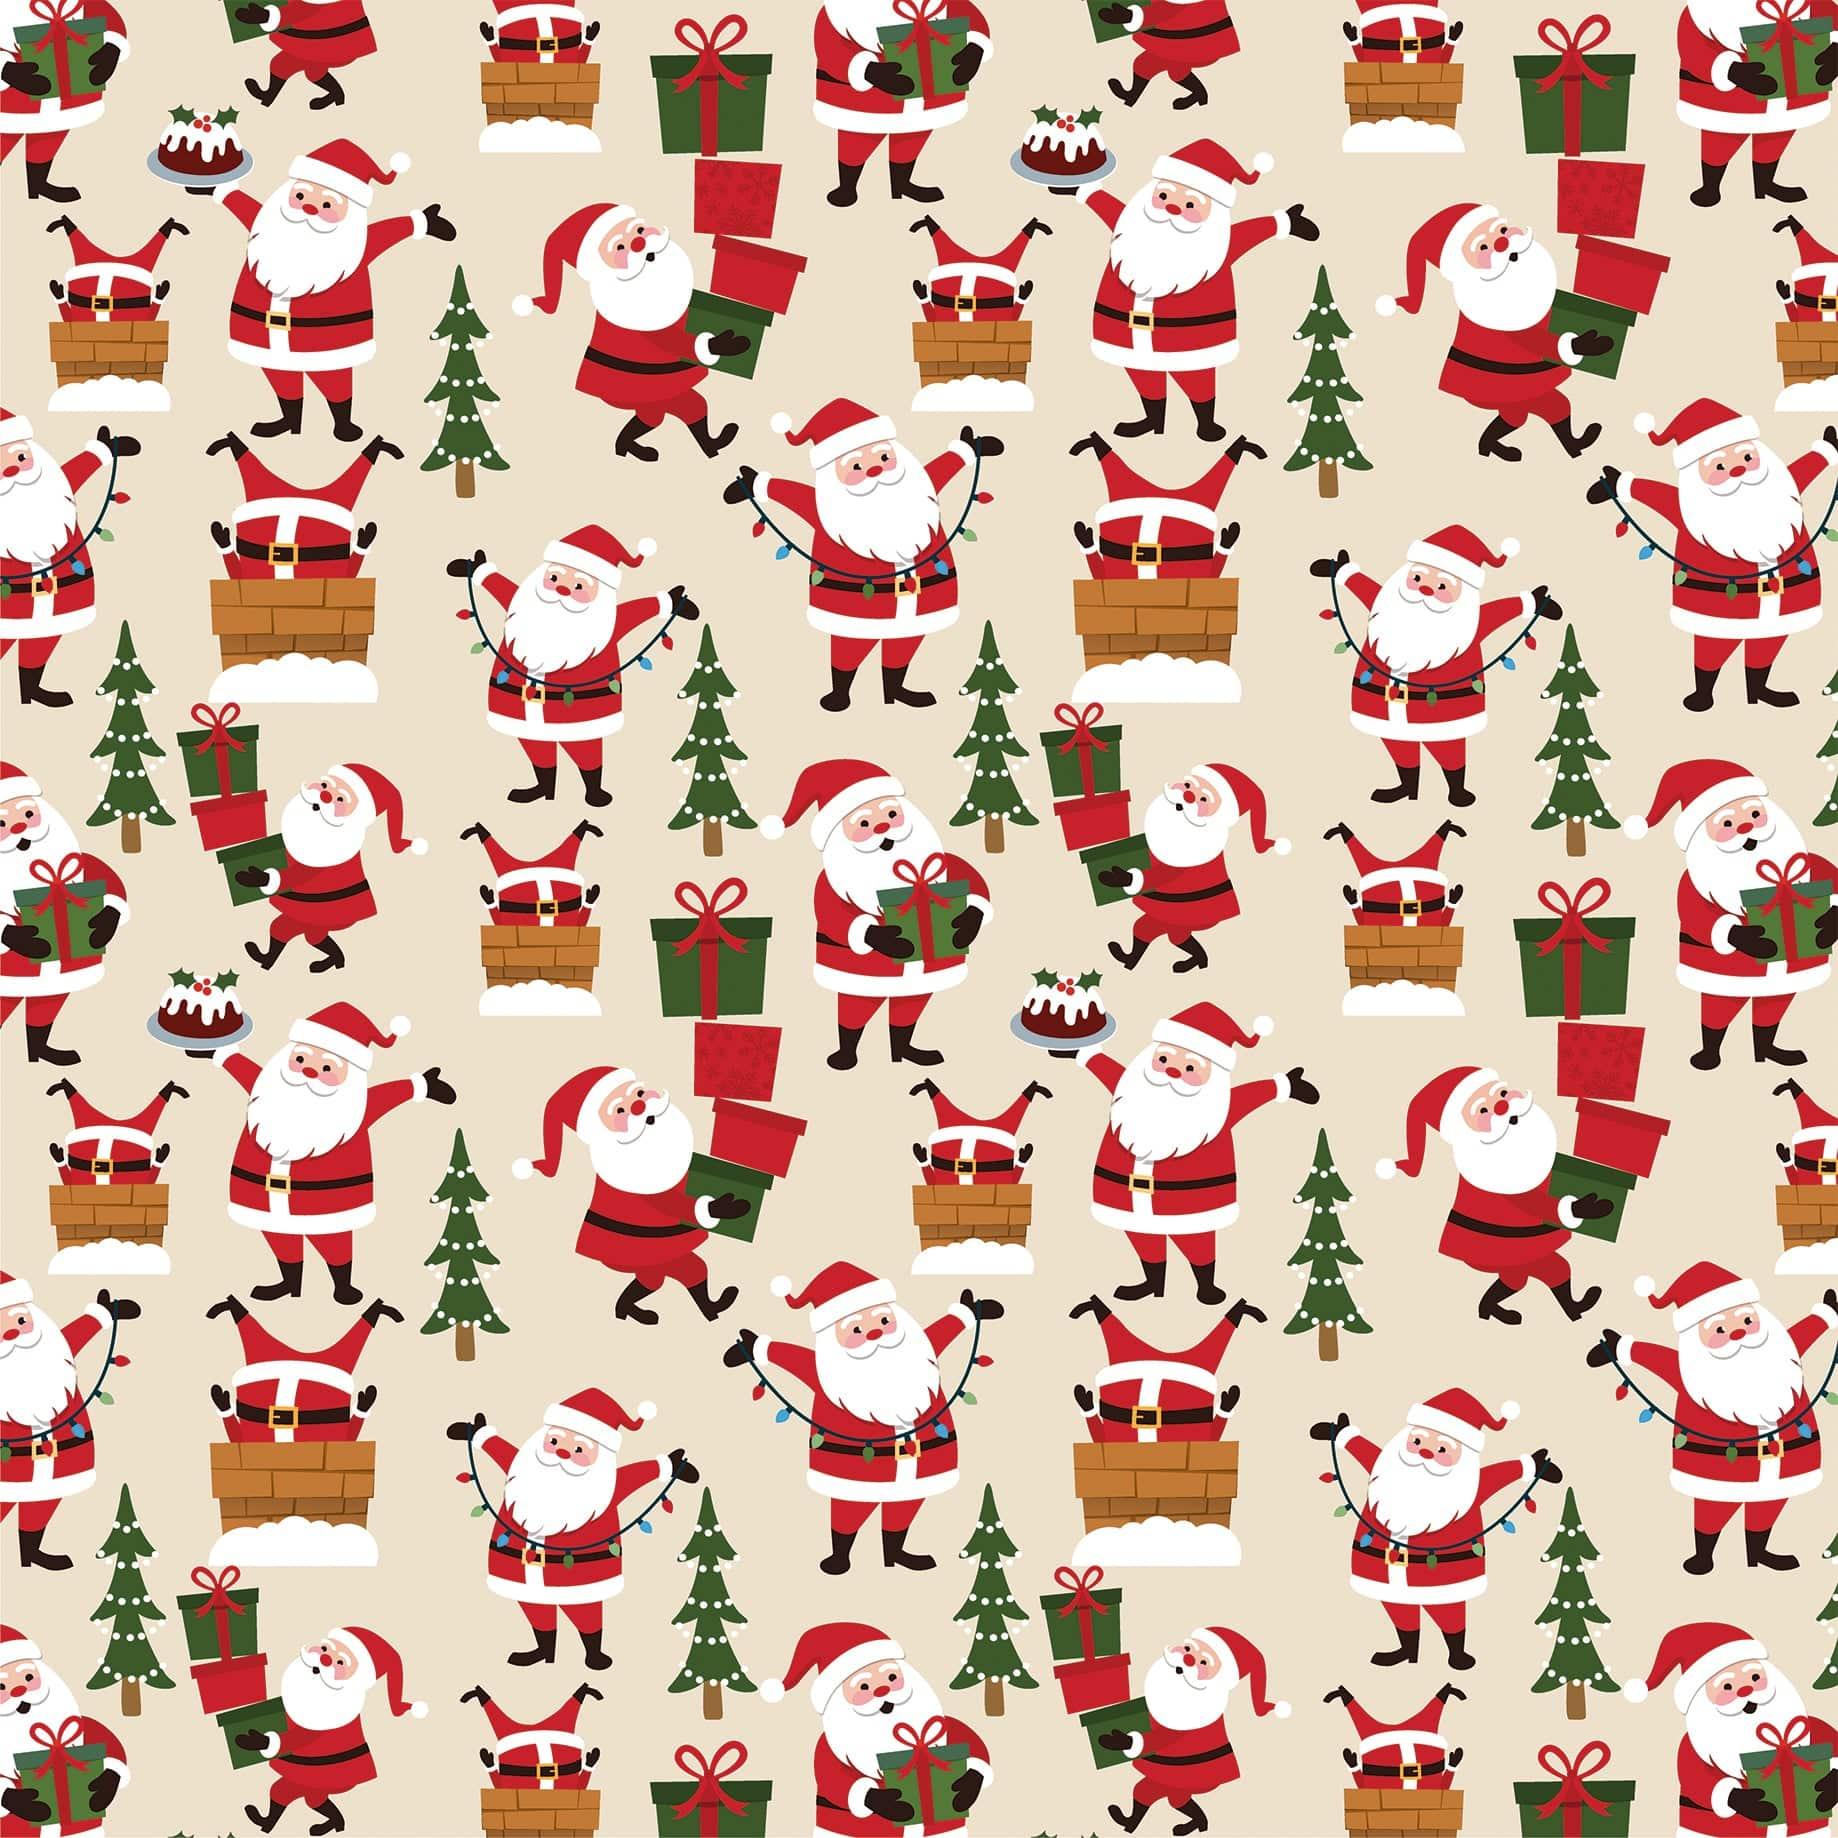 The Magic of Christmas Collection Holiday Prep 12 x 12 Double-Sided Scrapbook Paper by Echo Park Paper - Scrapbook Supply Companies